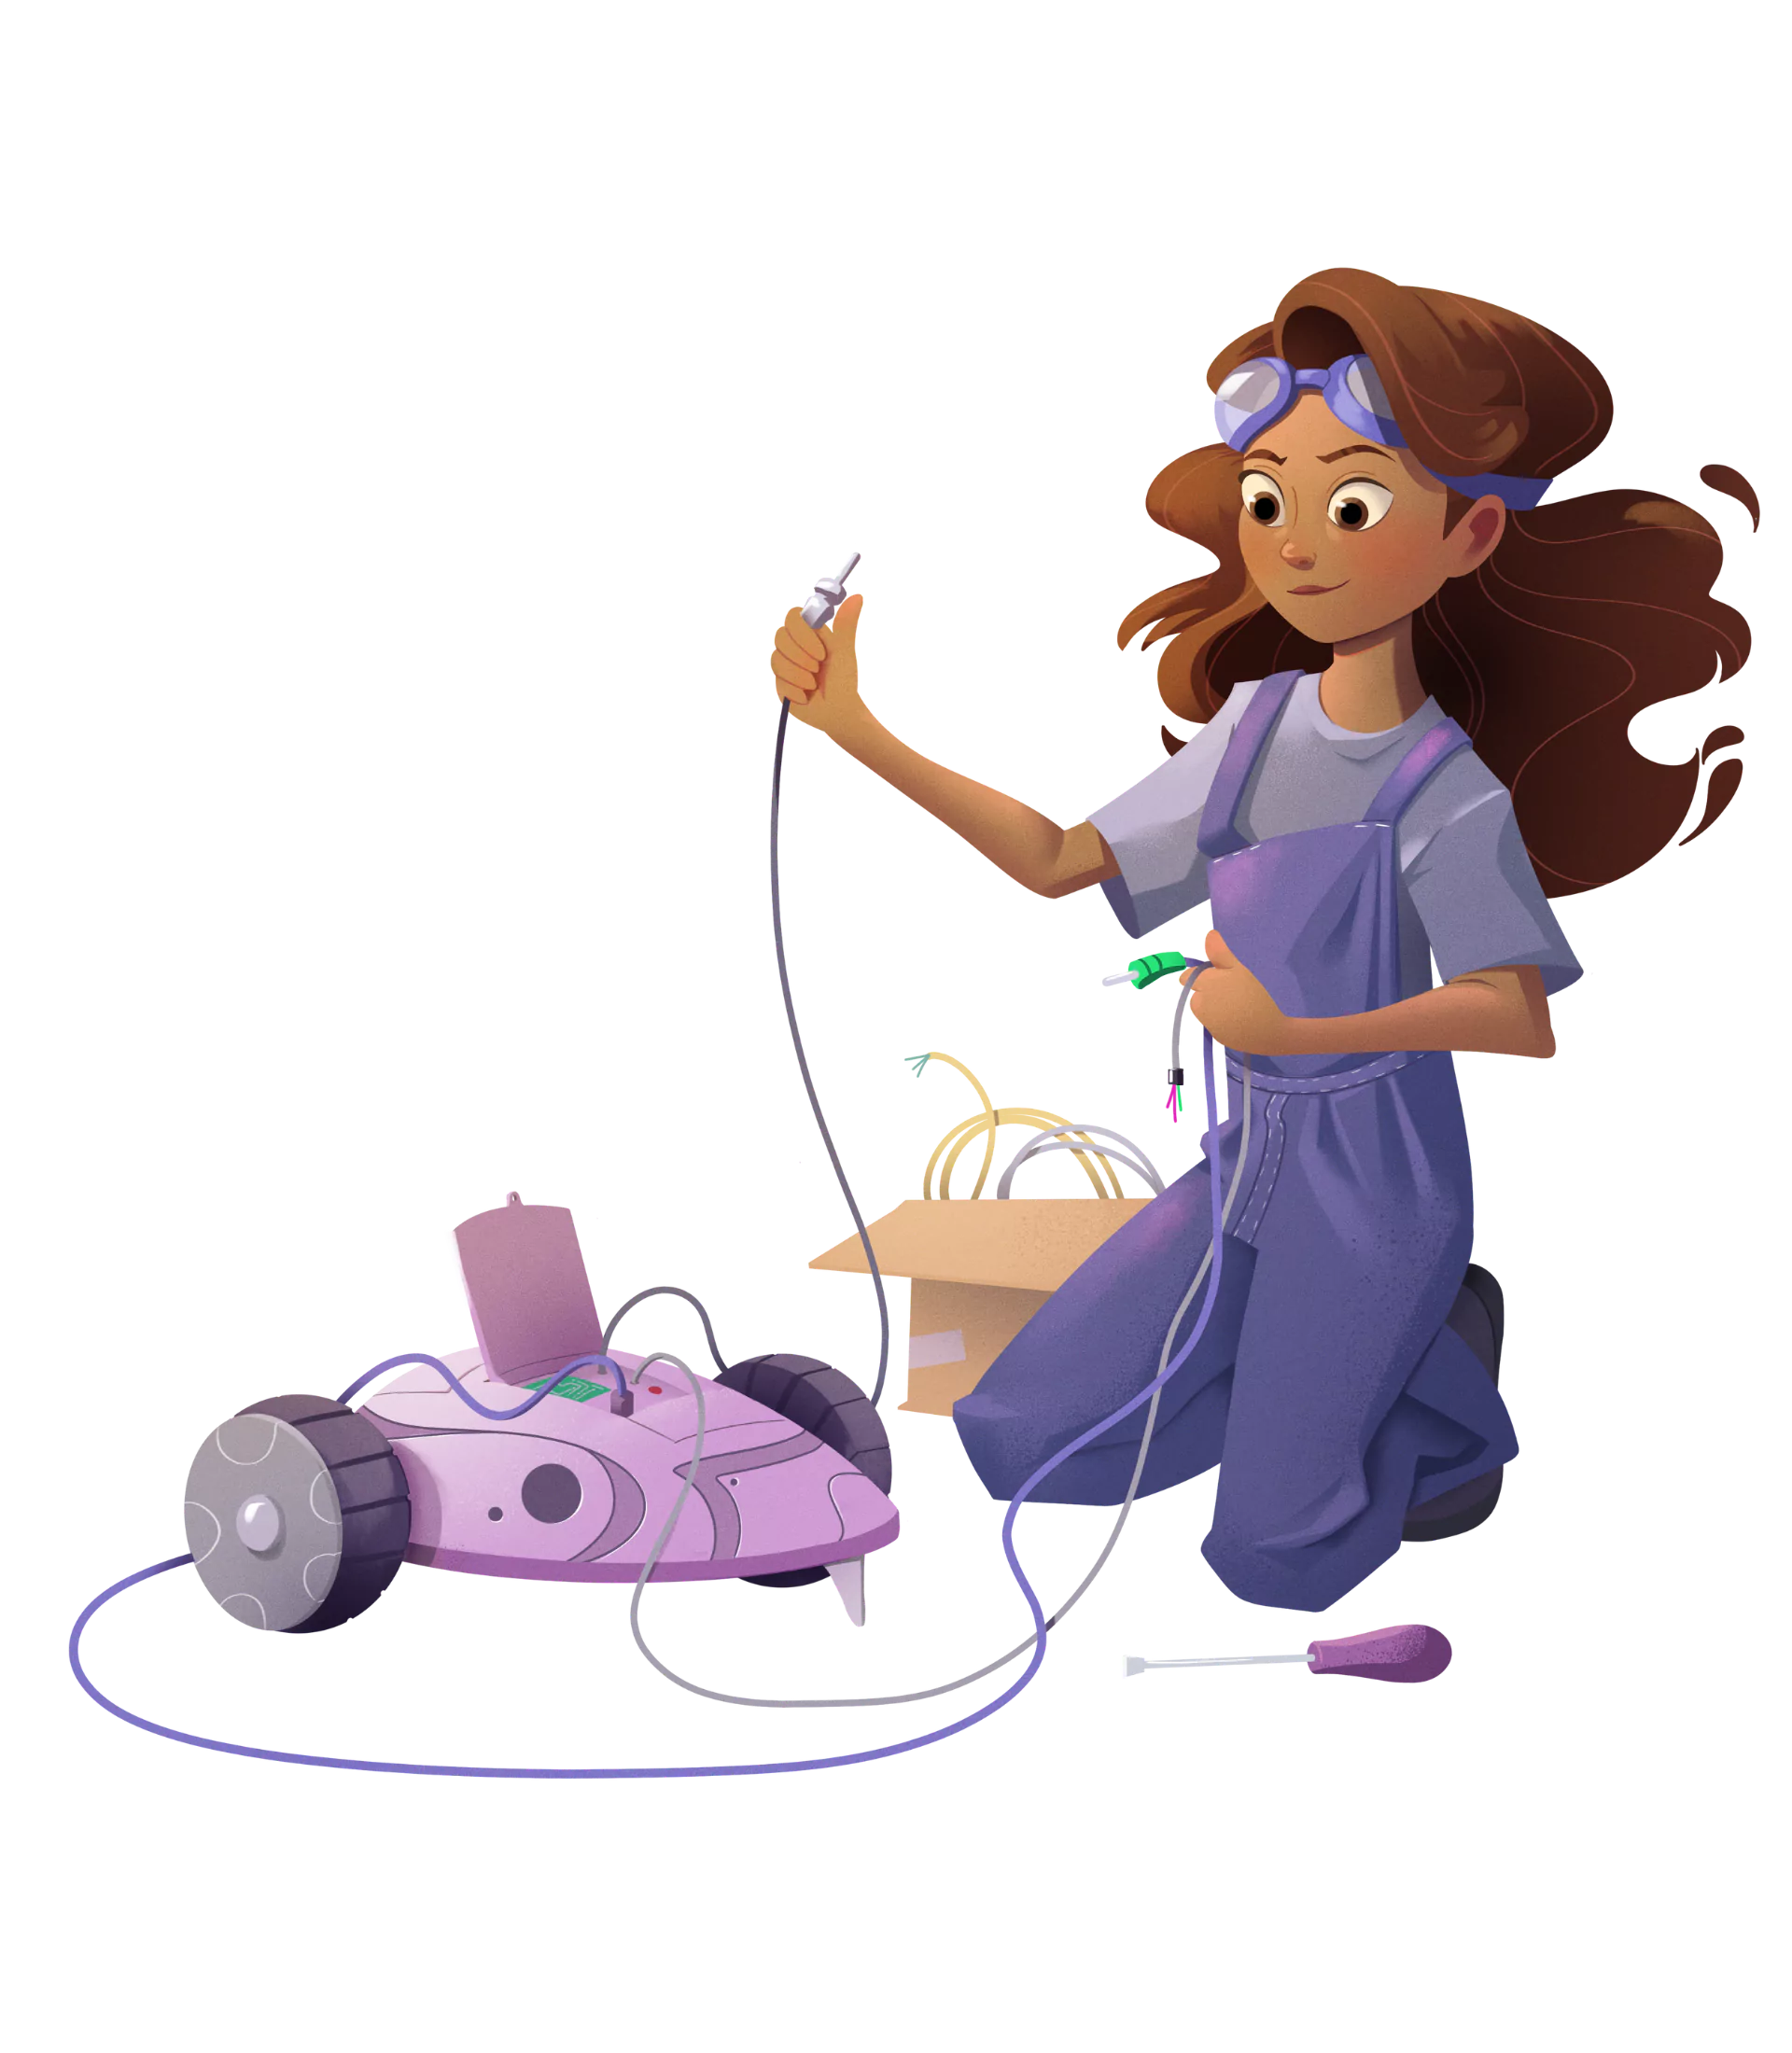 A young girl with brown wavy hair and a purple jumpsuit  builds a light purple robotic car. This is Erandi, Erandi Aprende friendly AI STEAM buddy.